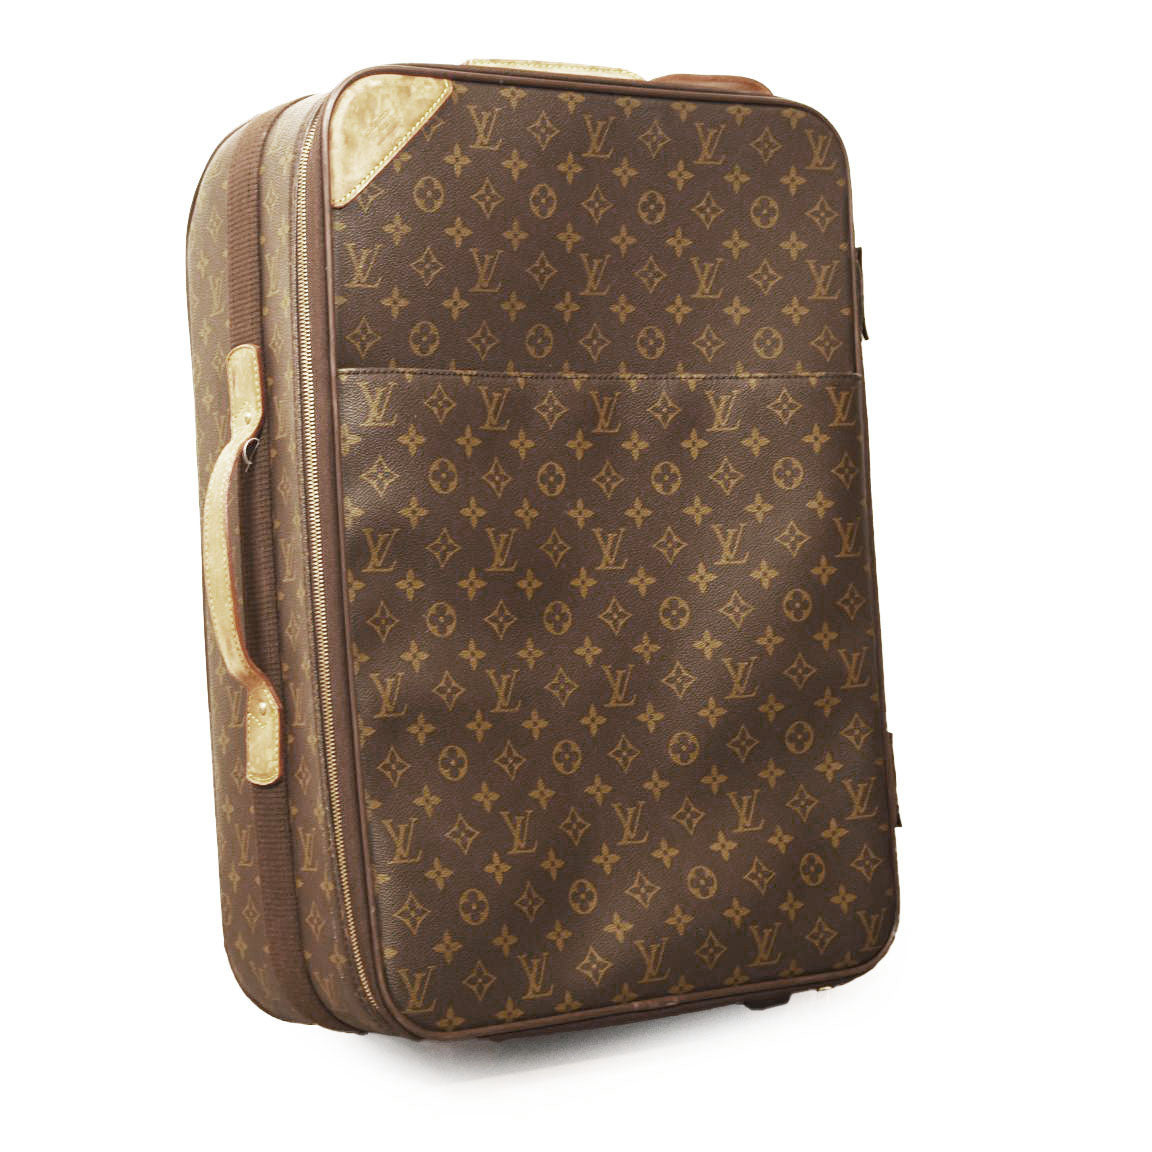 Up for your consideration: LOUIS VUITTON Monogram Pegase 45